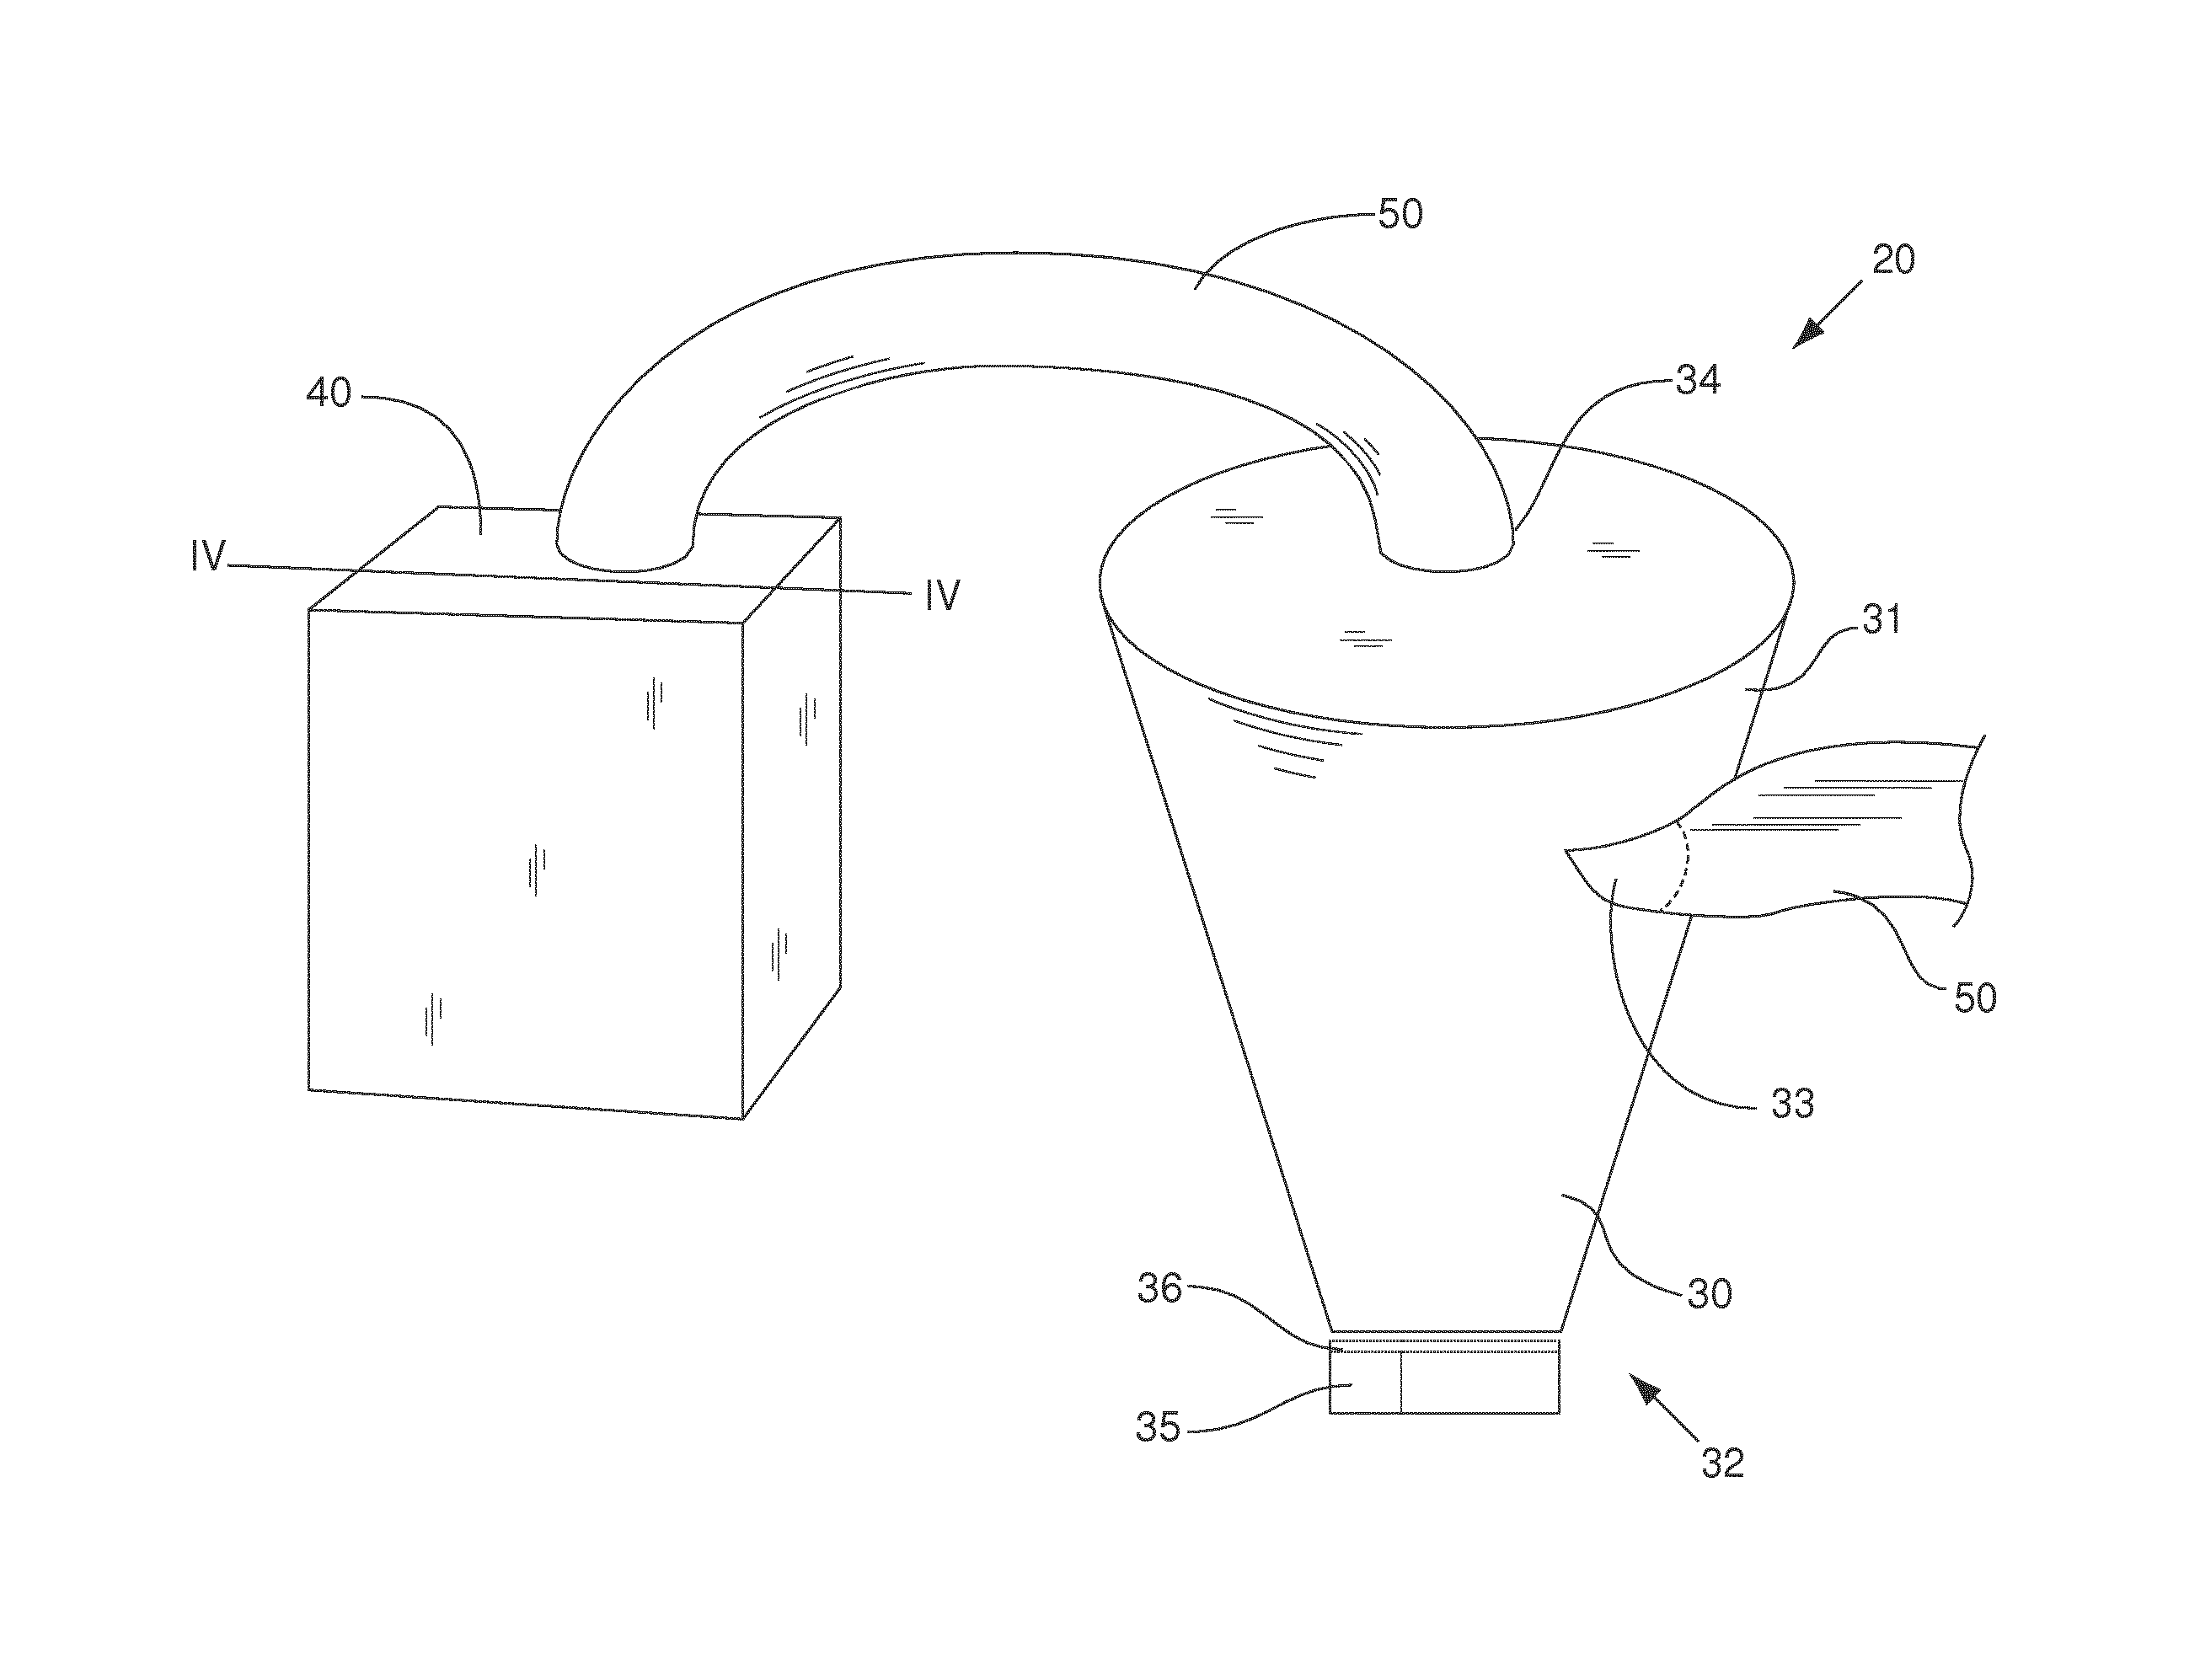 Planter Exhaust Air Removing Apparatus and Method of Use Thereof